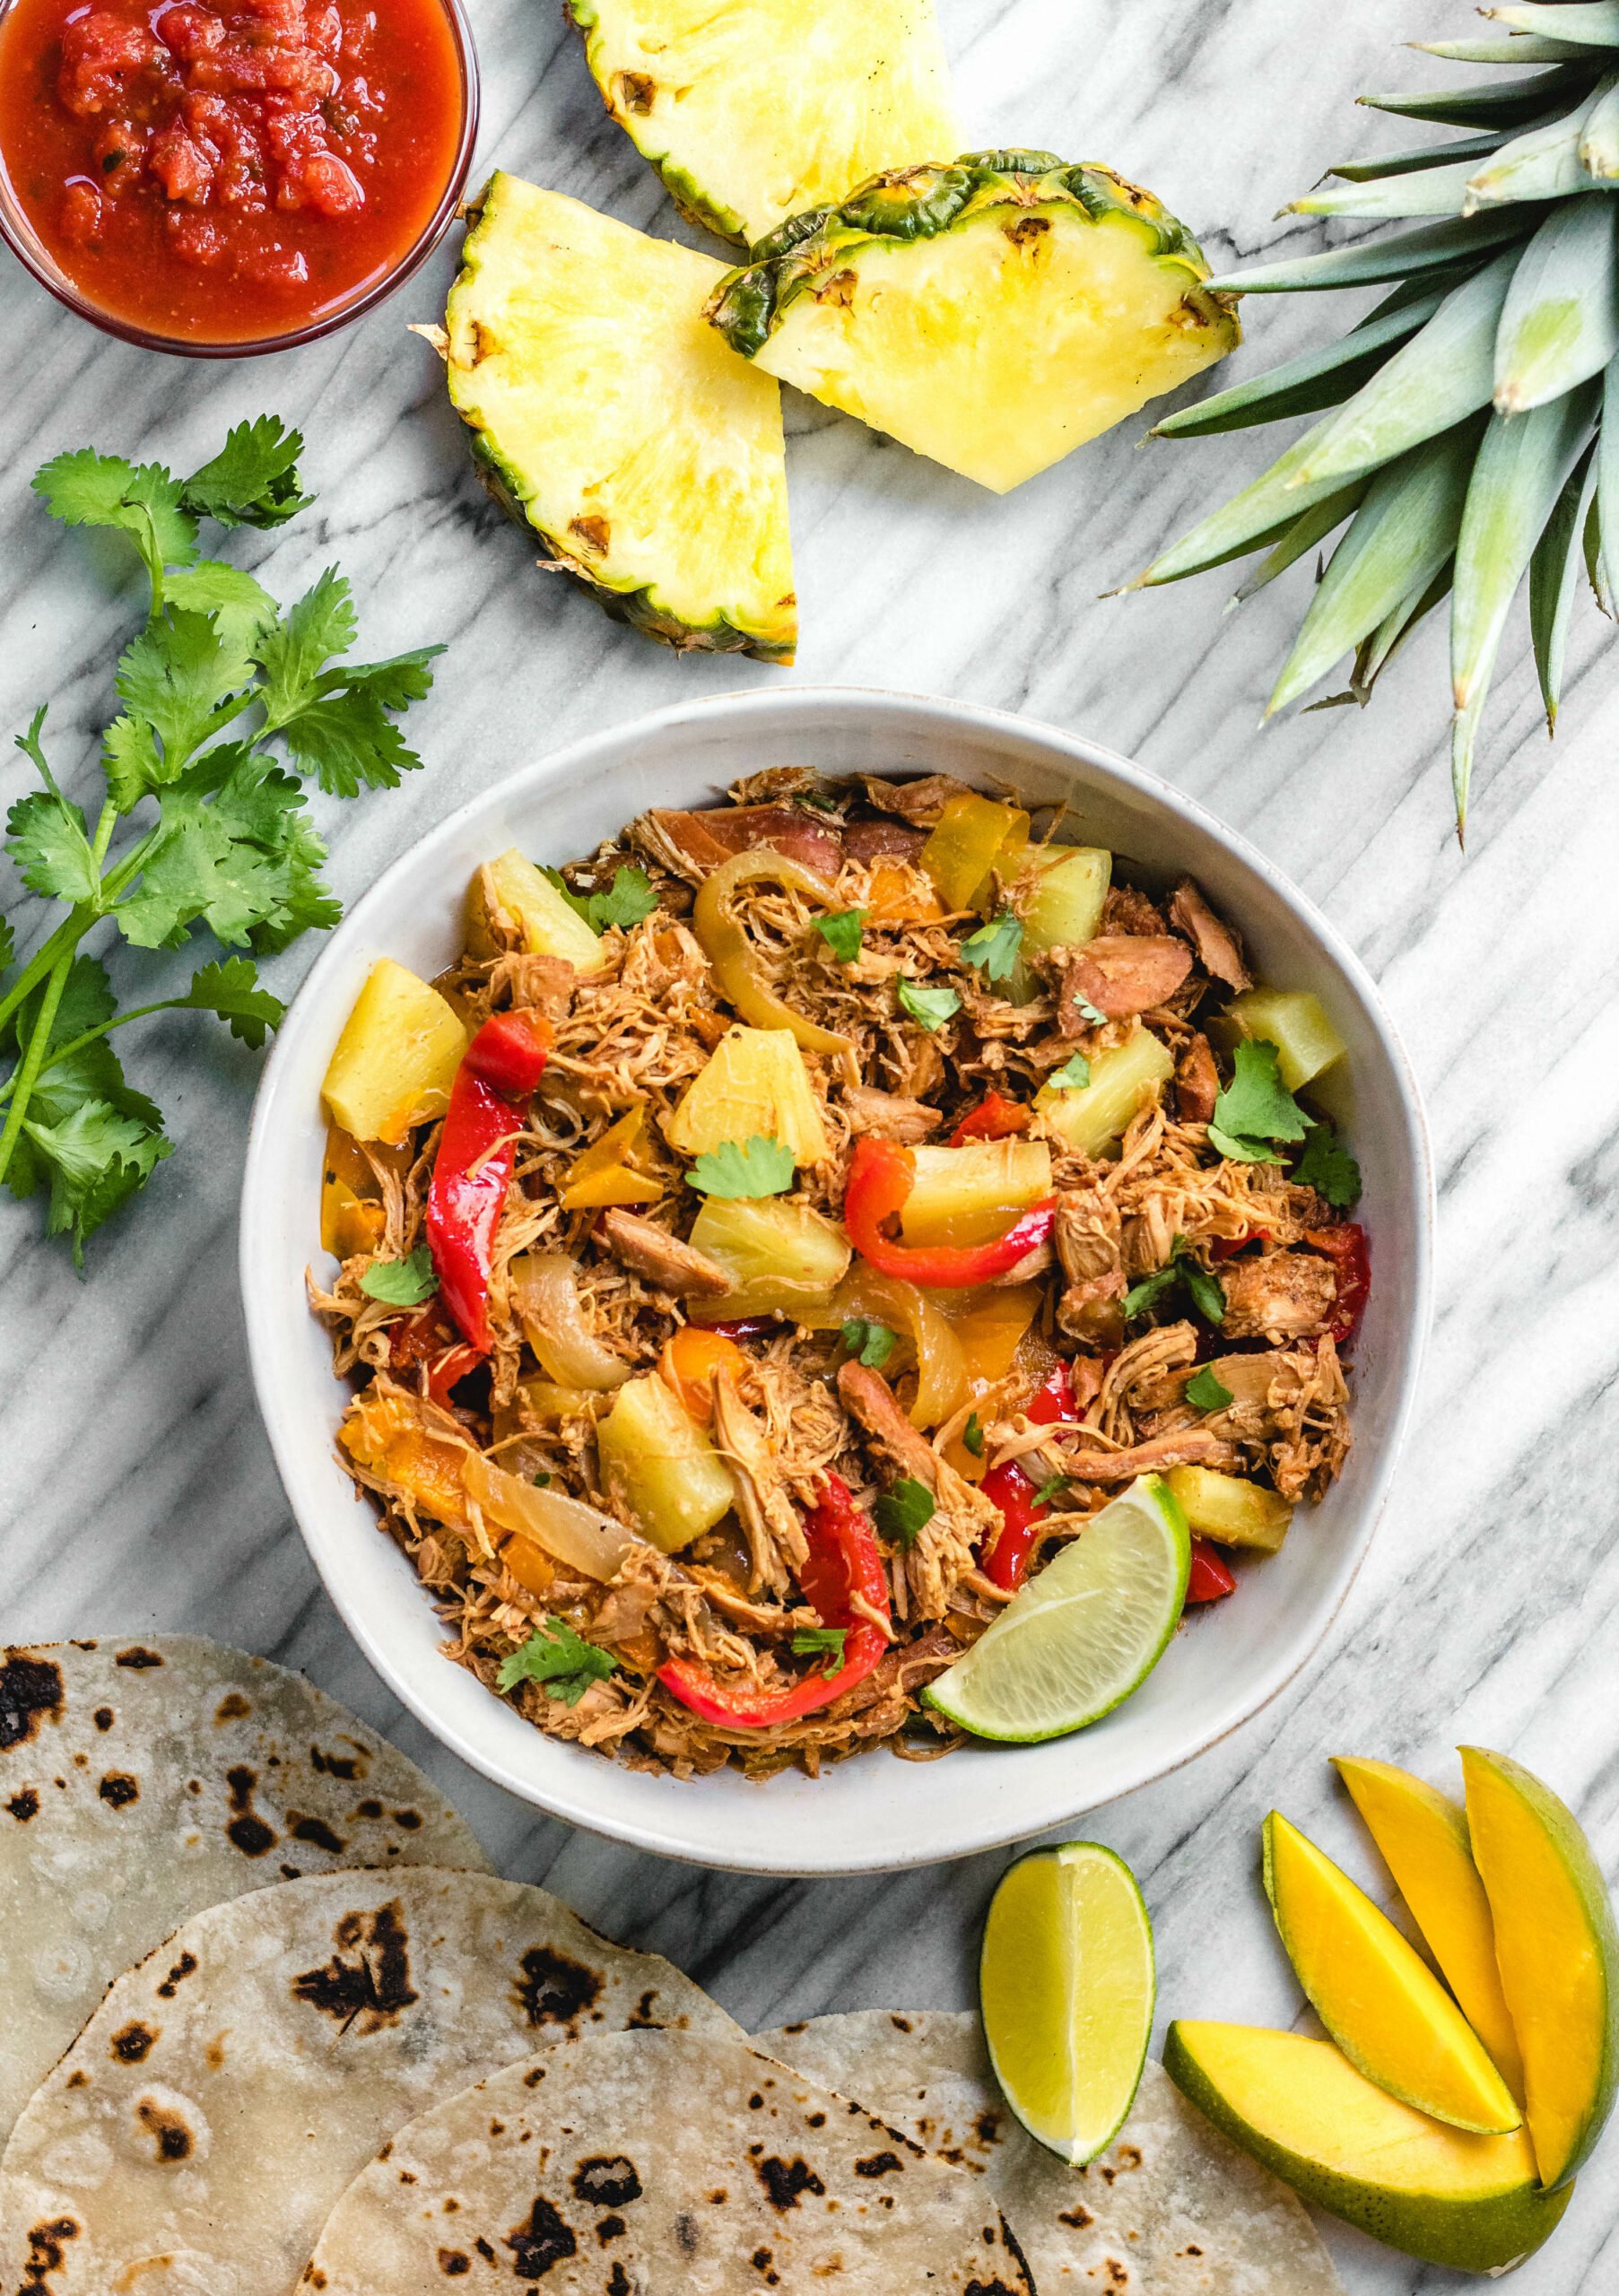 This easy Whole30 slow cooker Hawaiian chicken fajitas recipe is perfect for an easy family-friendly weeknight meal. It's a simple set it and forget crockpot meal that's also paleo, gluten-free and dairy-free. The tender, fall apart chicken thighs and vegetables can be served in wraps, as a salad over greens, or as part of a taco bar! #whole30chicken #whole30slowcooker #whole30fajitas #chickenfajitas